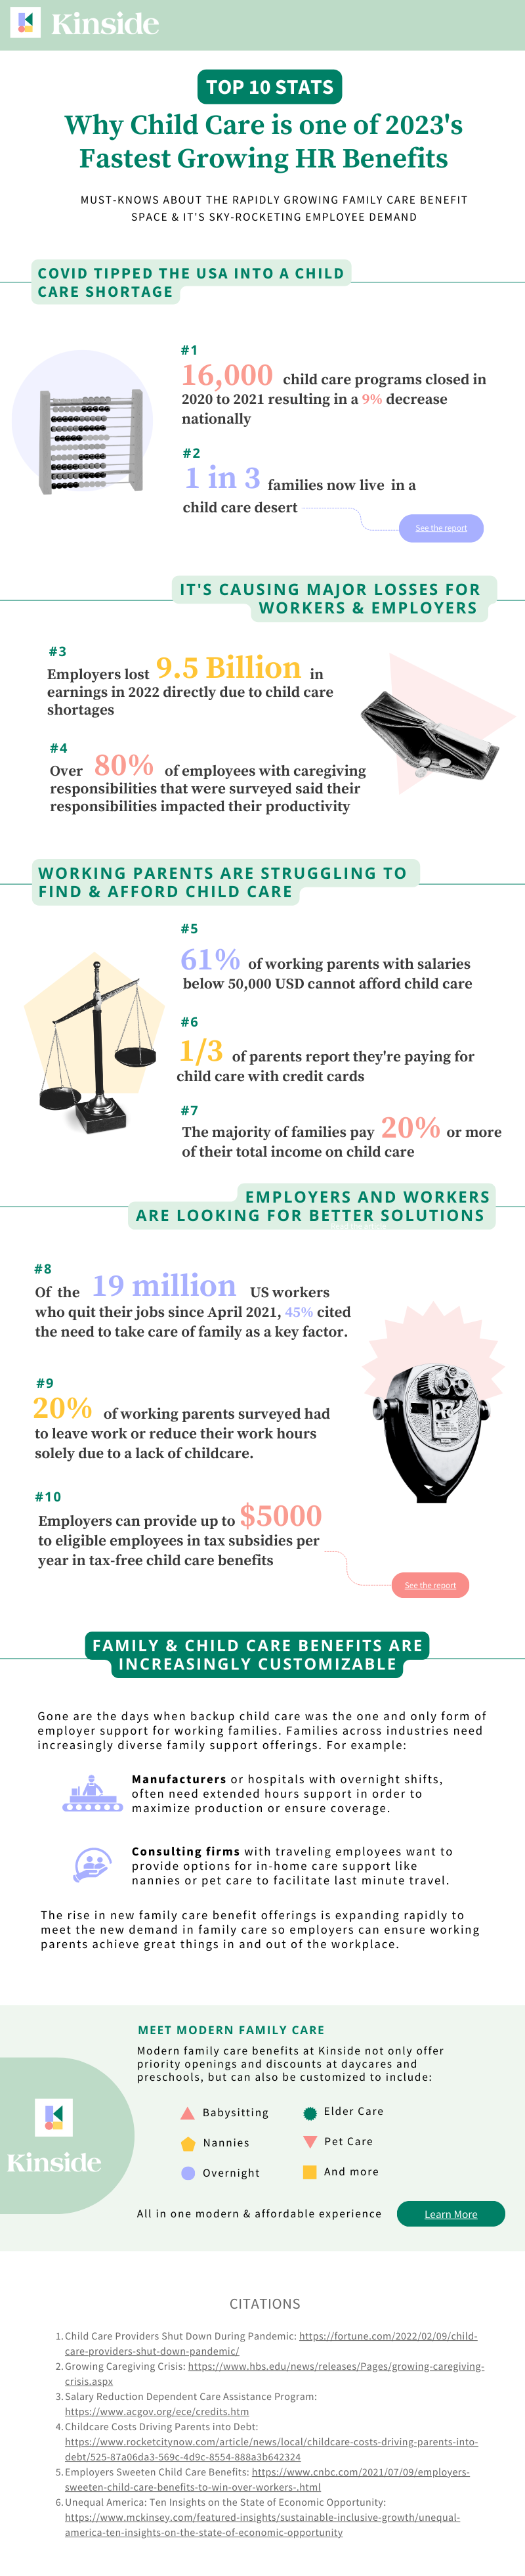 Child Care Top 10 - Infographic Kinside-1